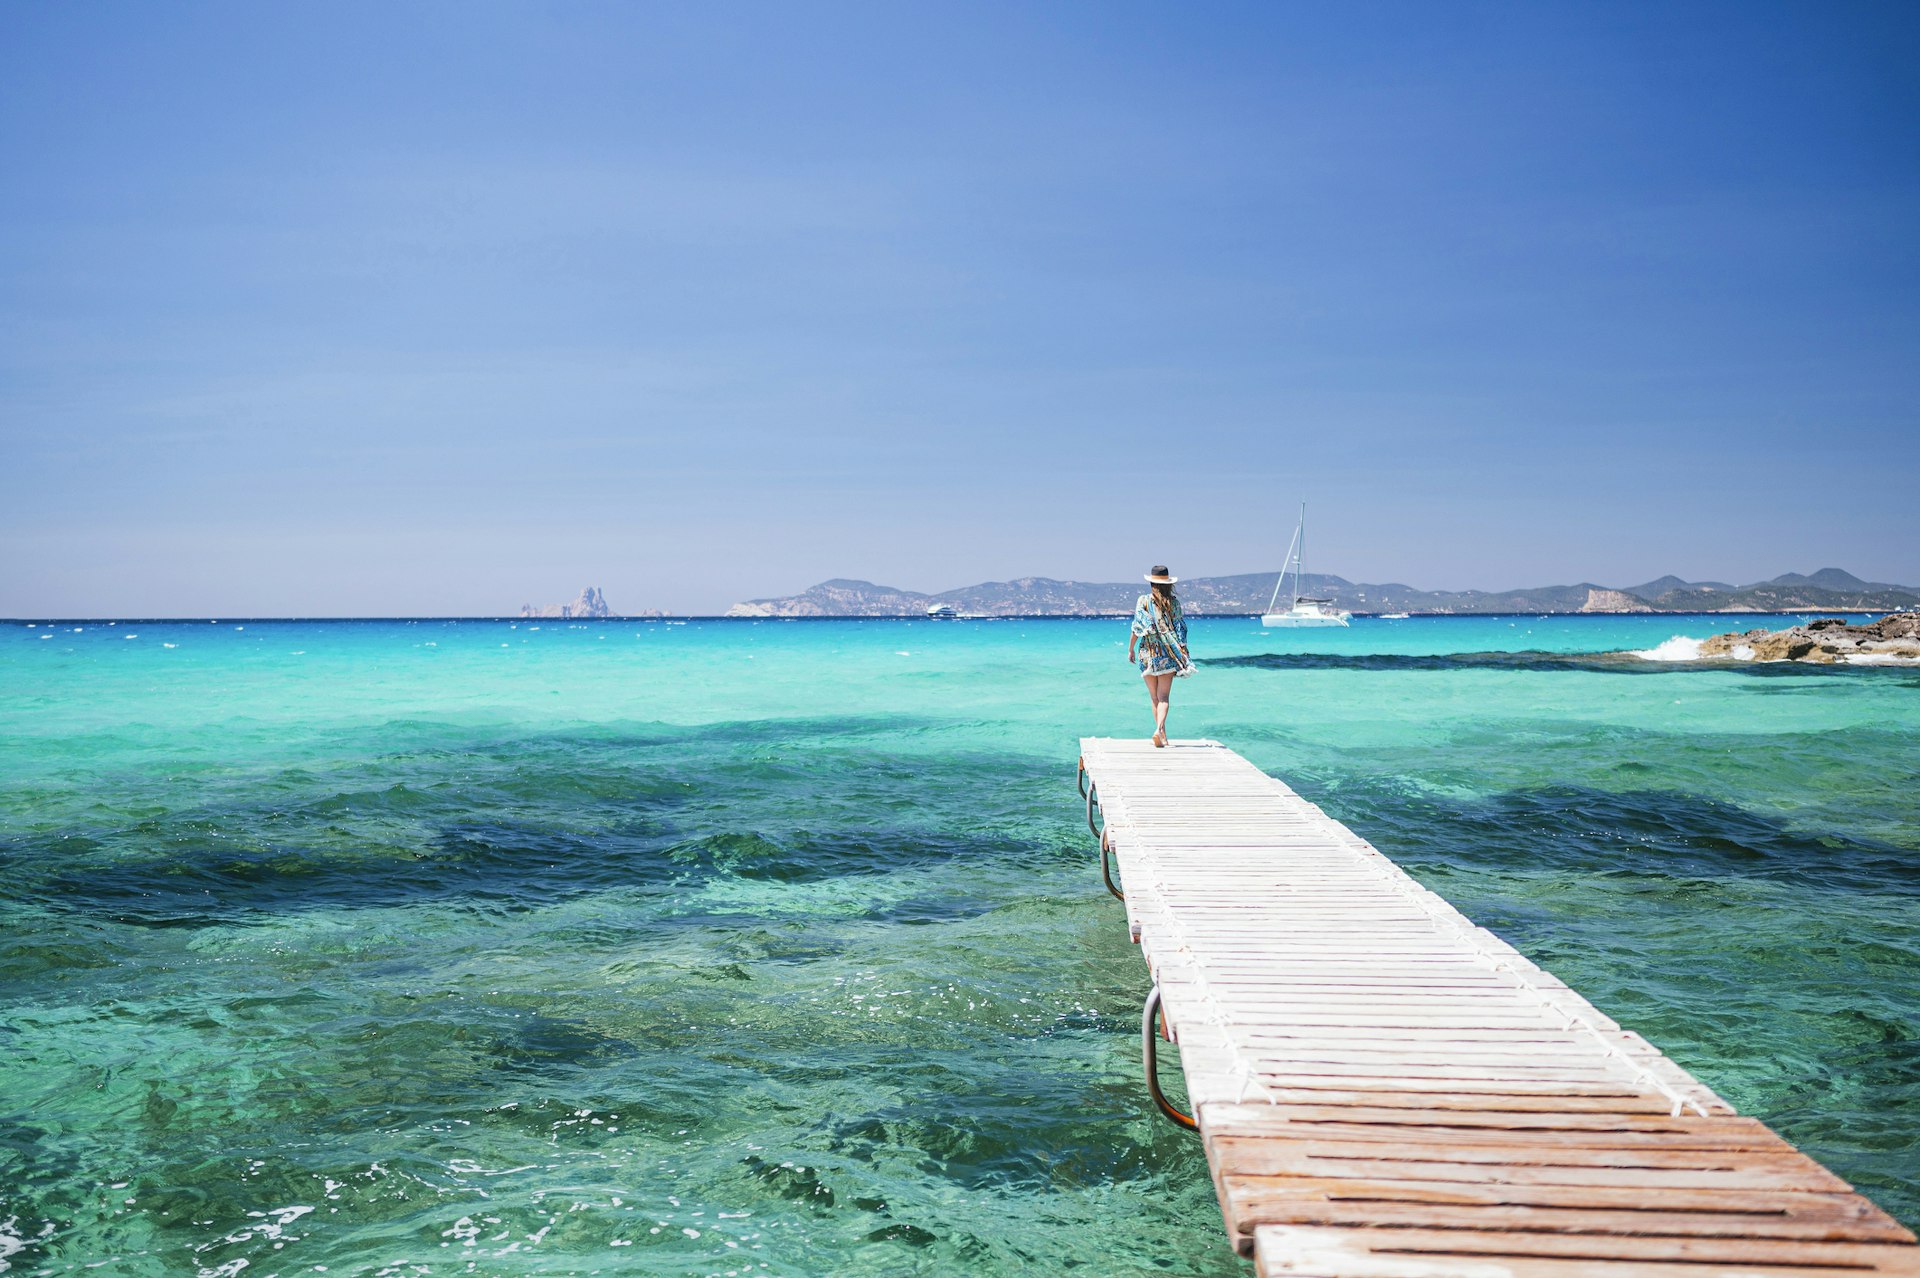 A woman walks along a wooden pontoon towards a turquoise ocean on a beautiful sunny day. There's a boat in the distance and an island beyond